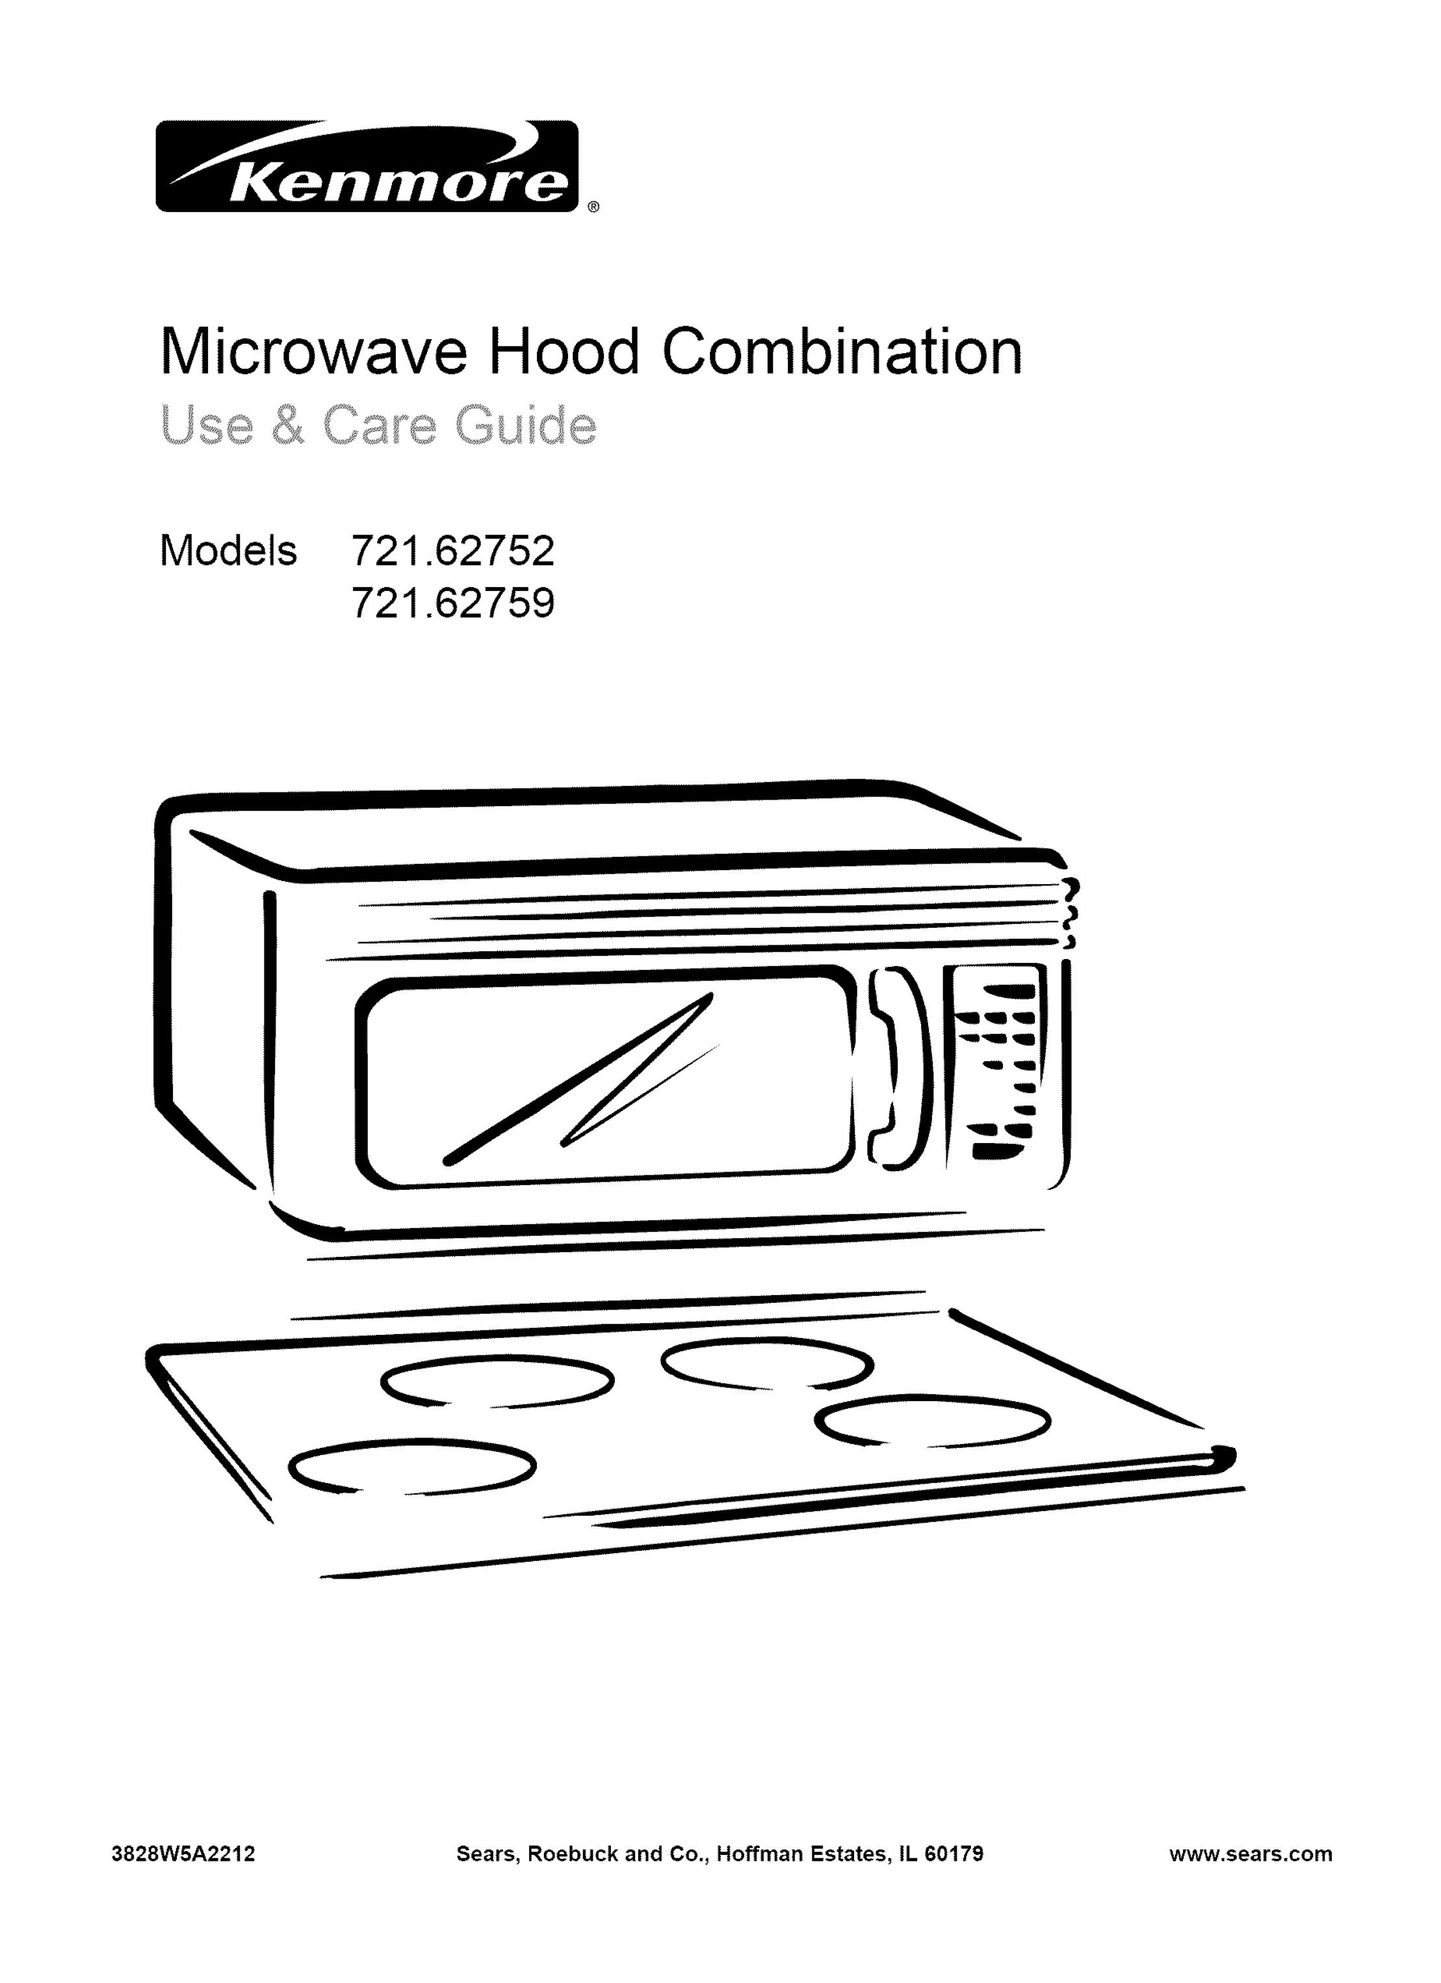 Kenmore 721.62759 Microwave Oven User Manual